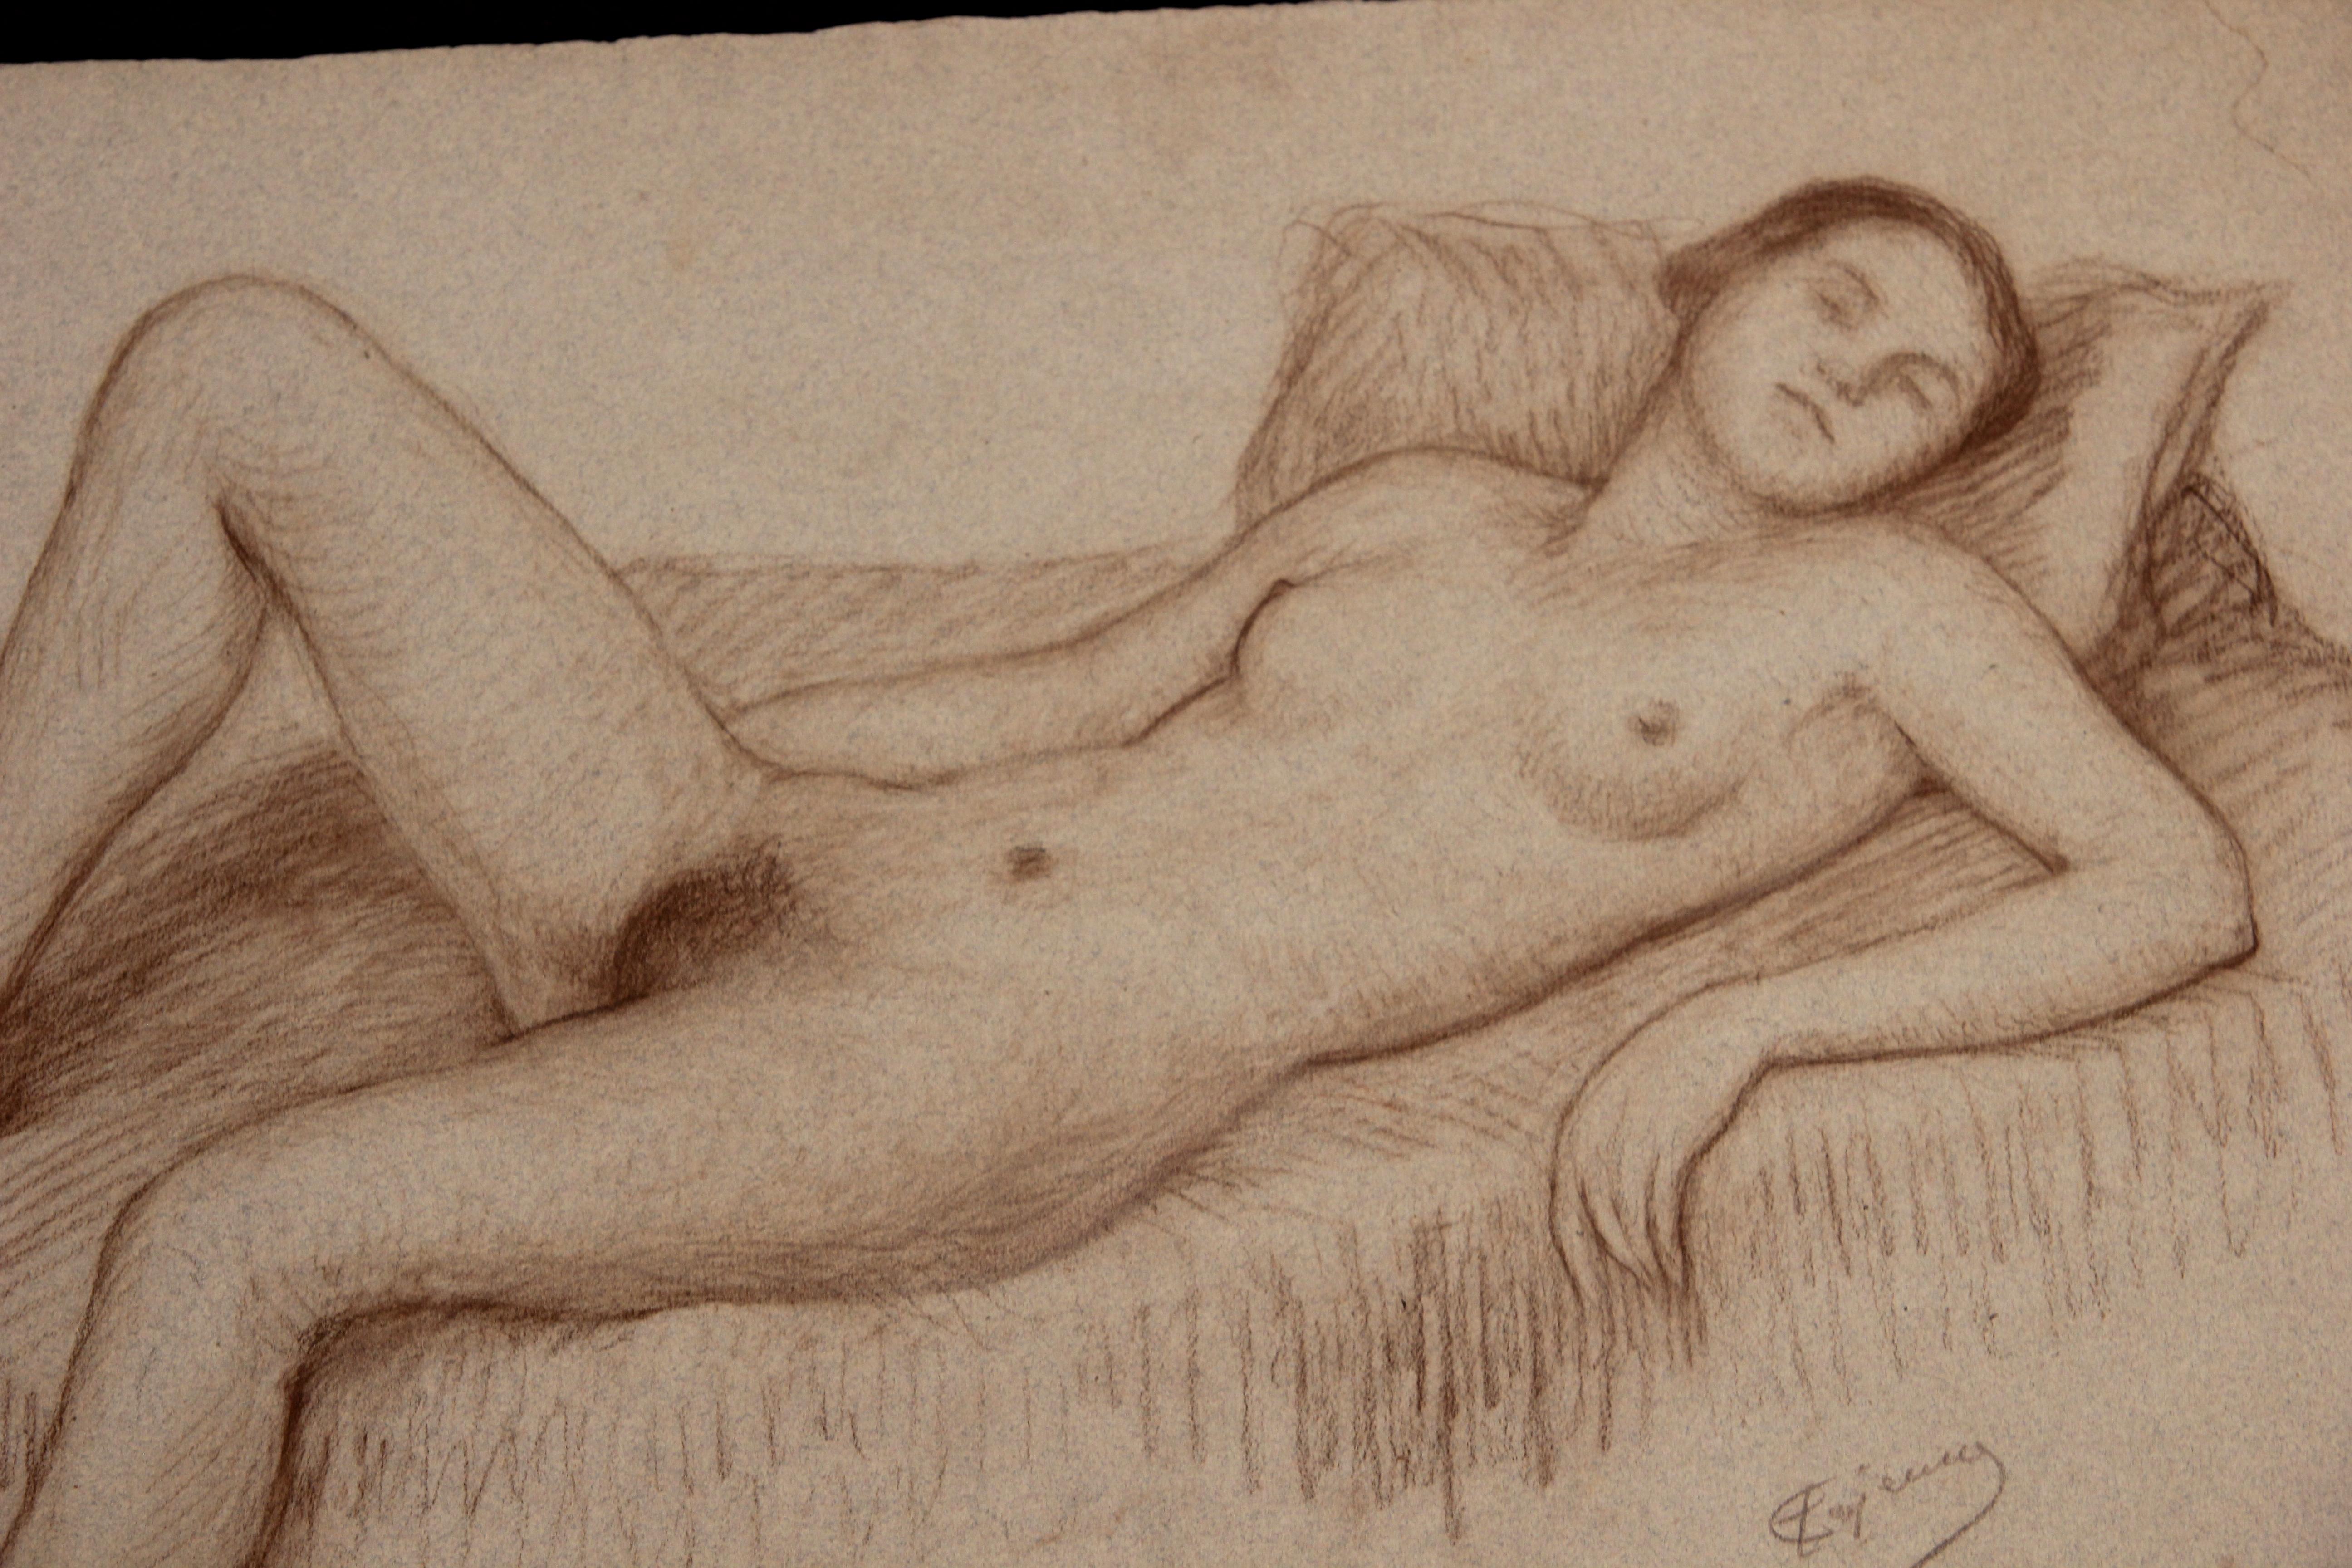 Reclining Naturalistic Nude Woman Study - Art by Emile Lejeune